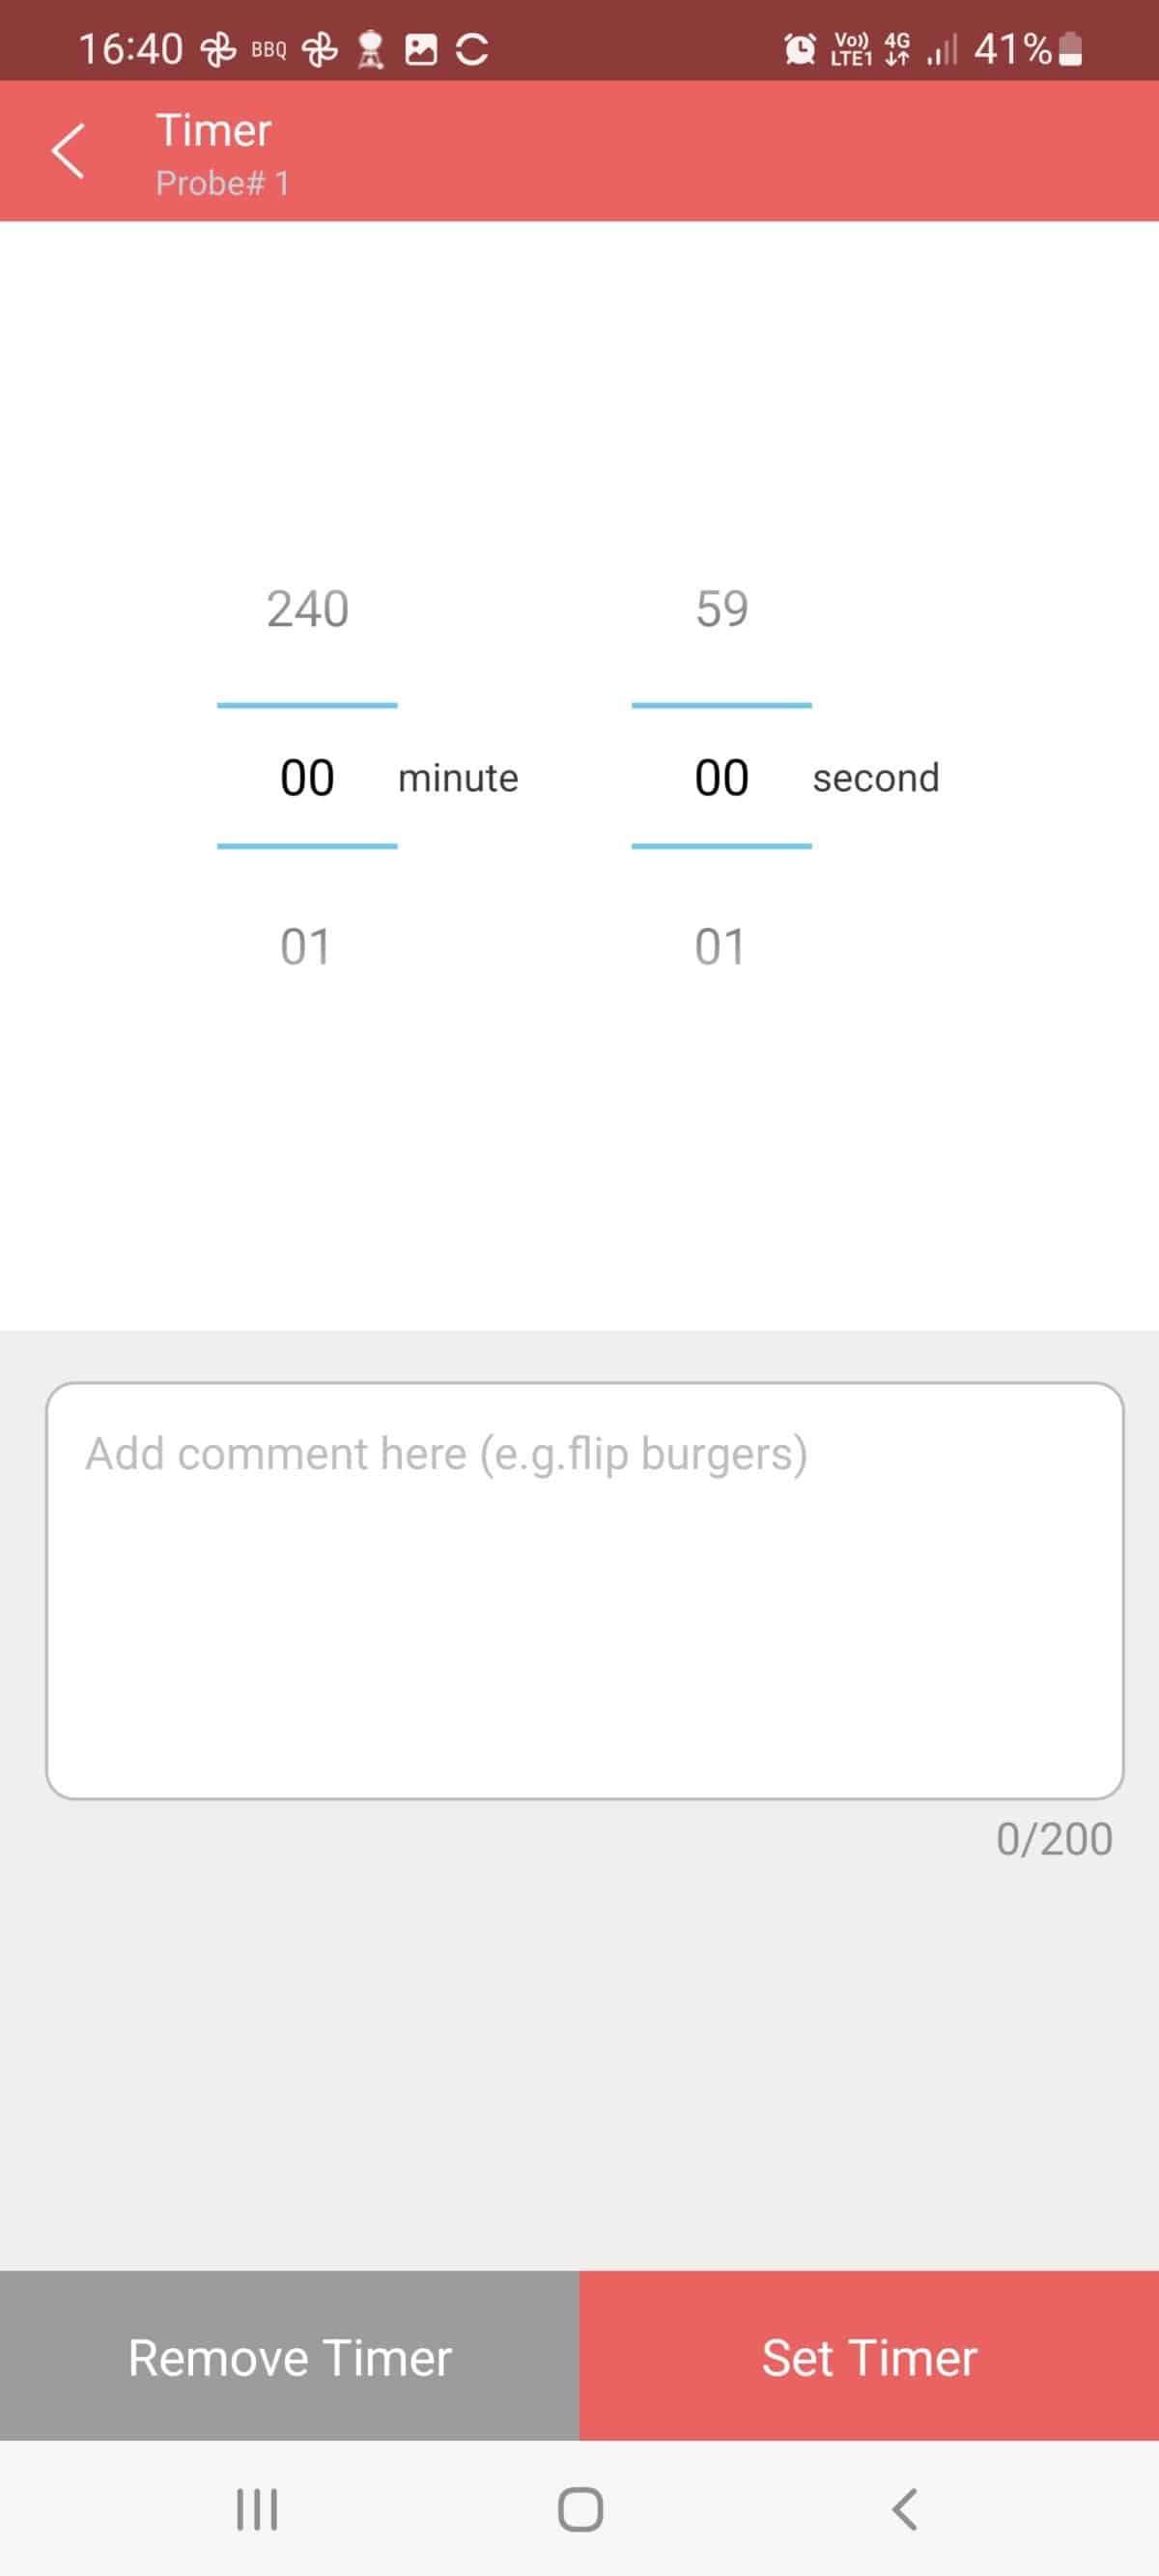 inkbird bbqgo smartphone app screenshot showing how to set a timer